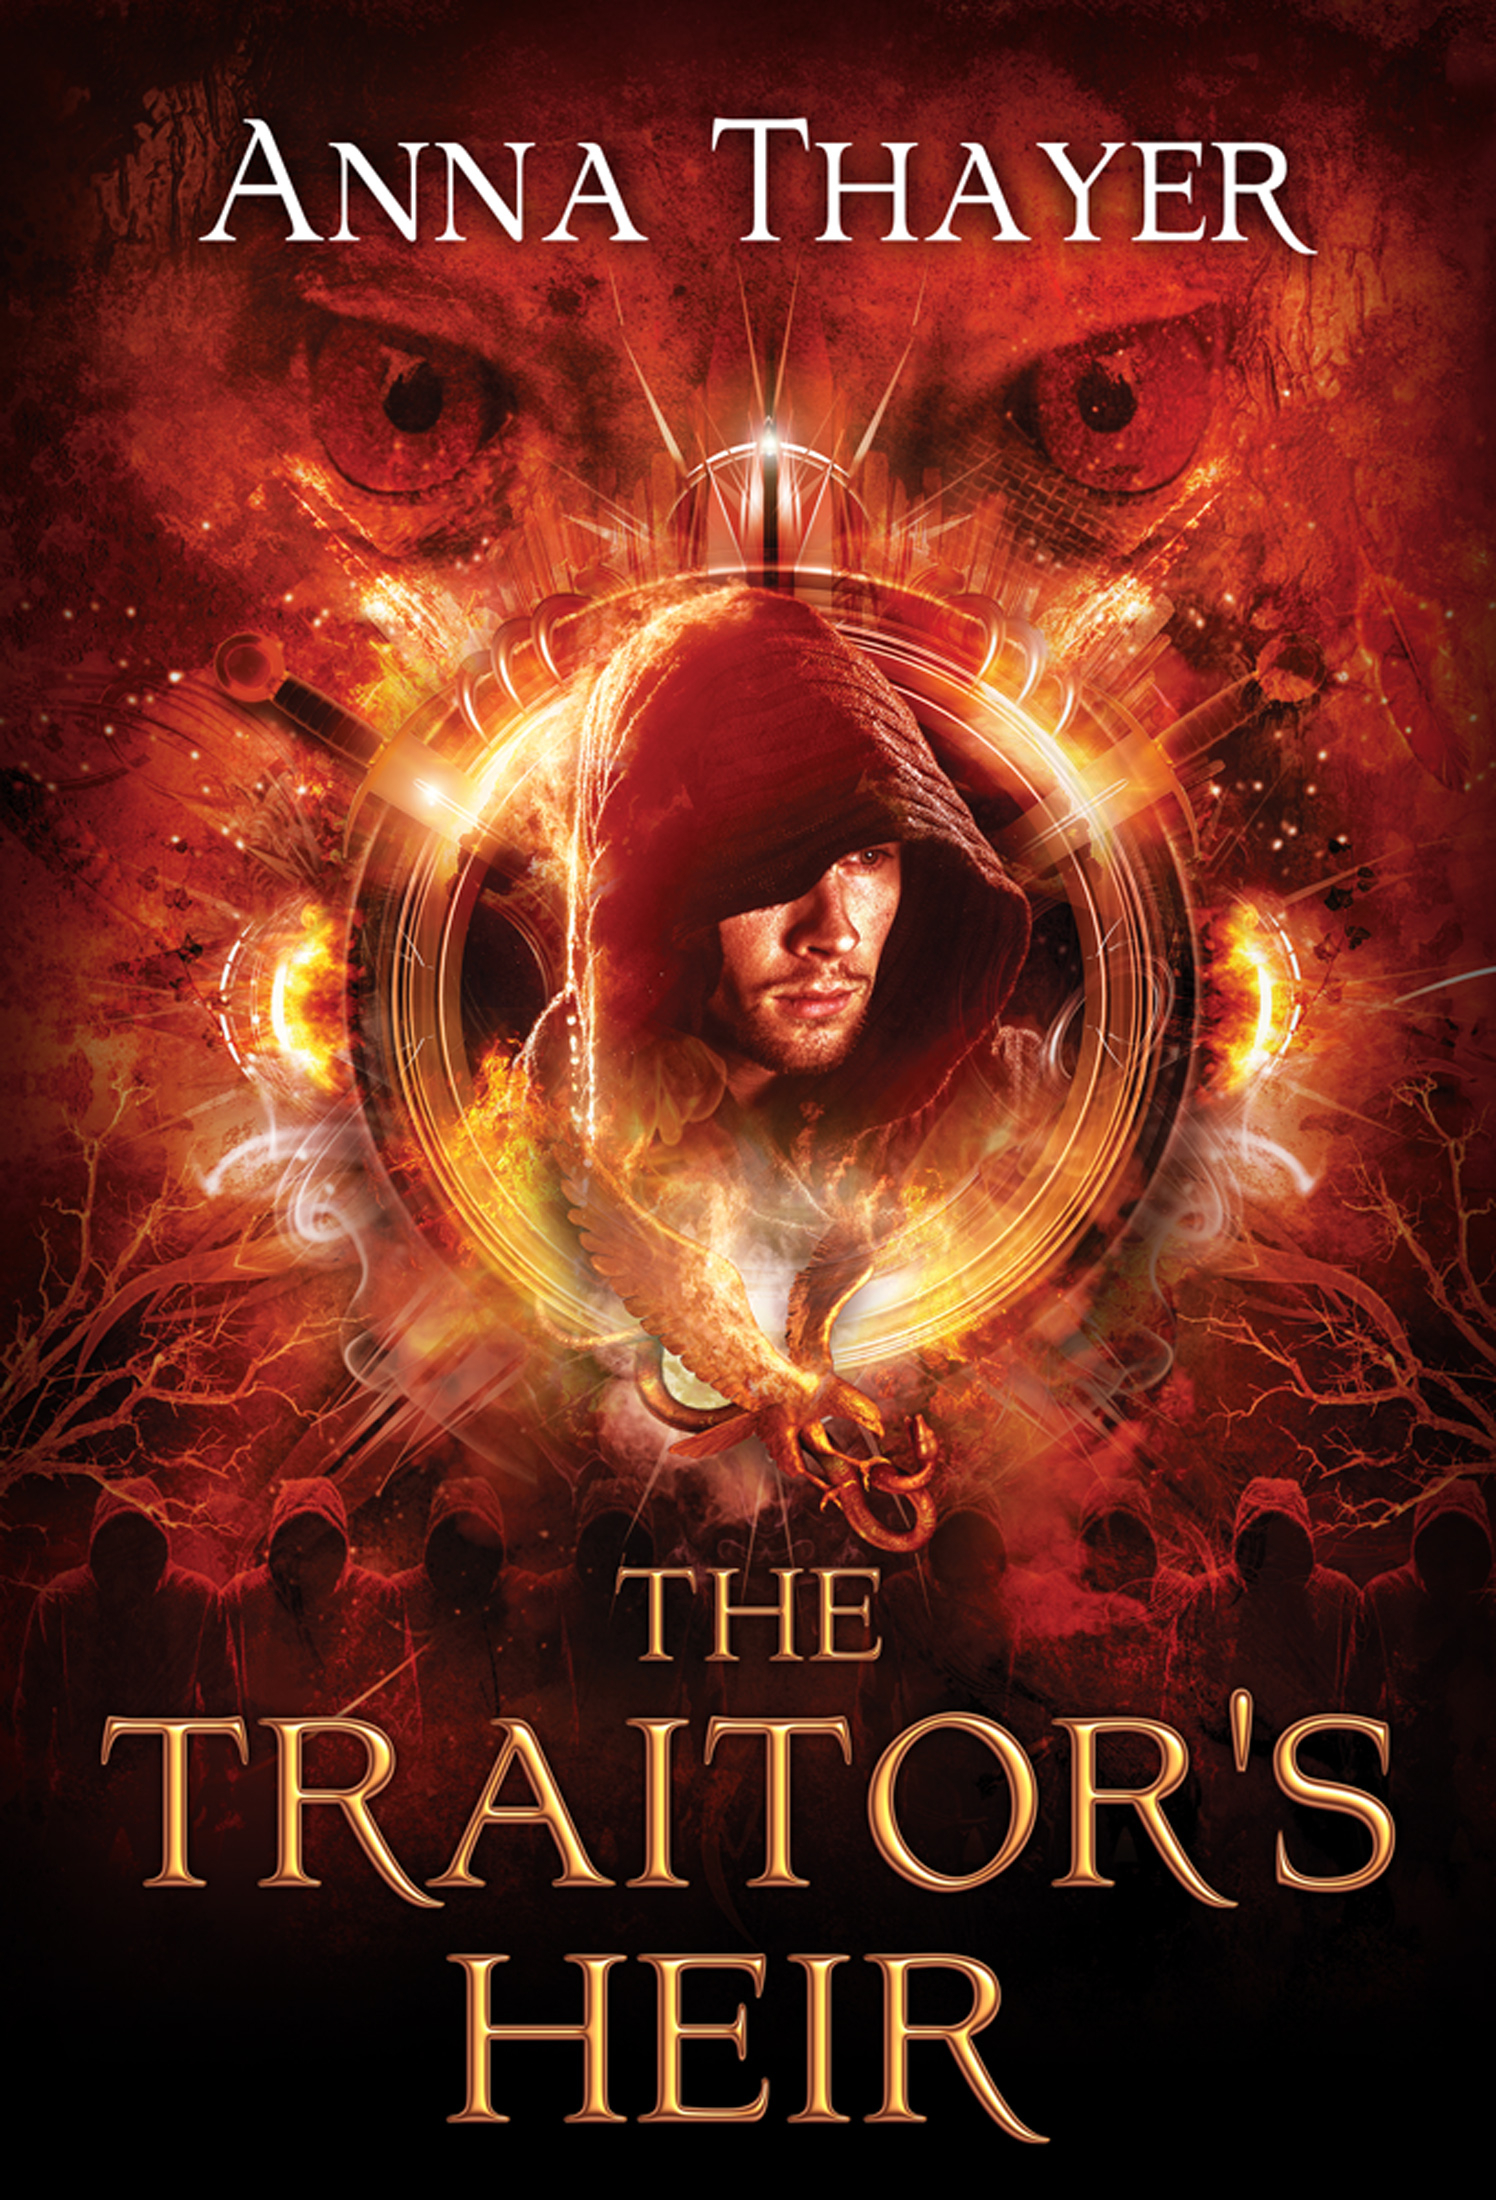 The Traitor's Heir by Anna Thayer